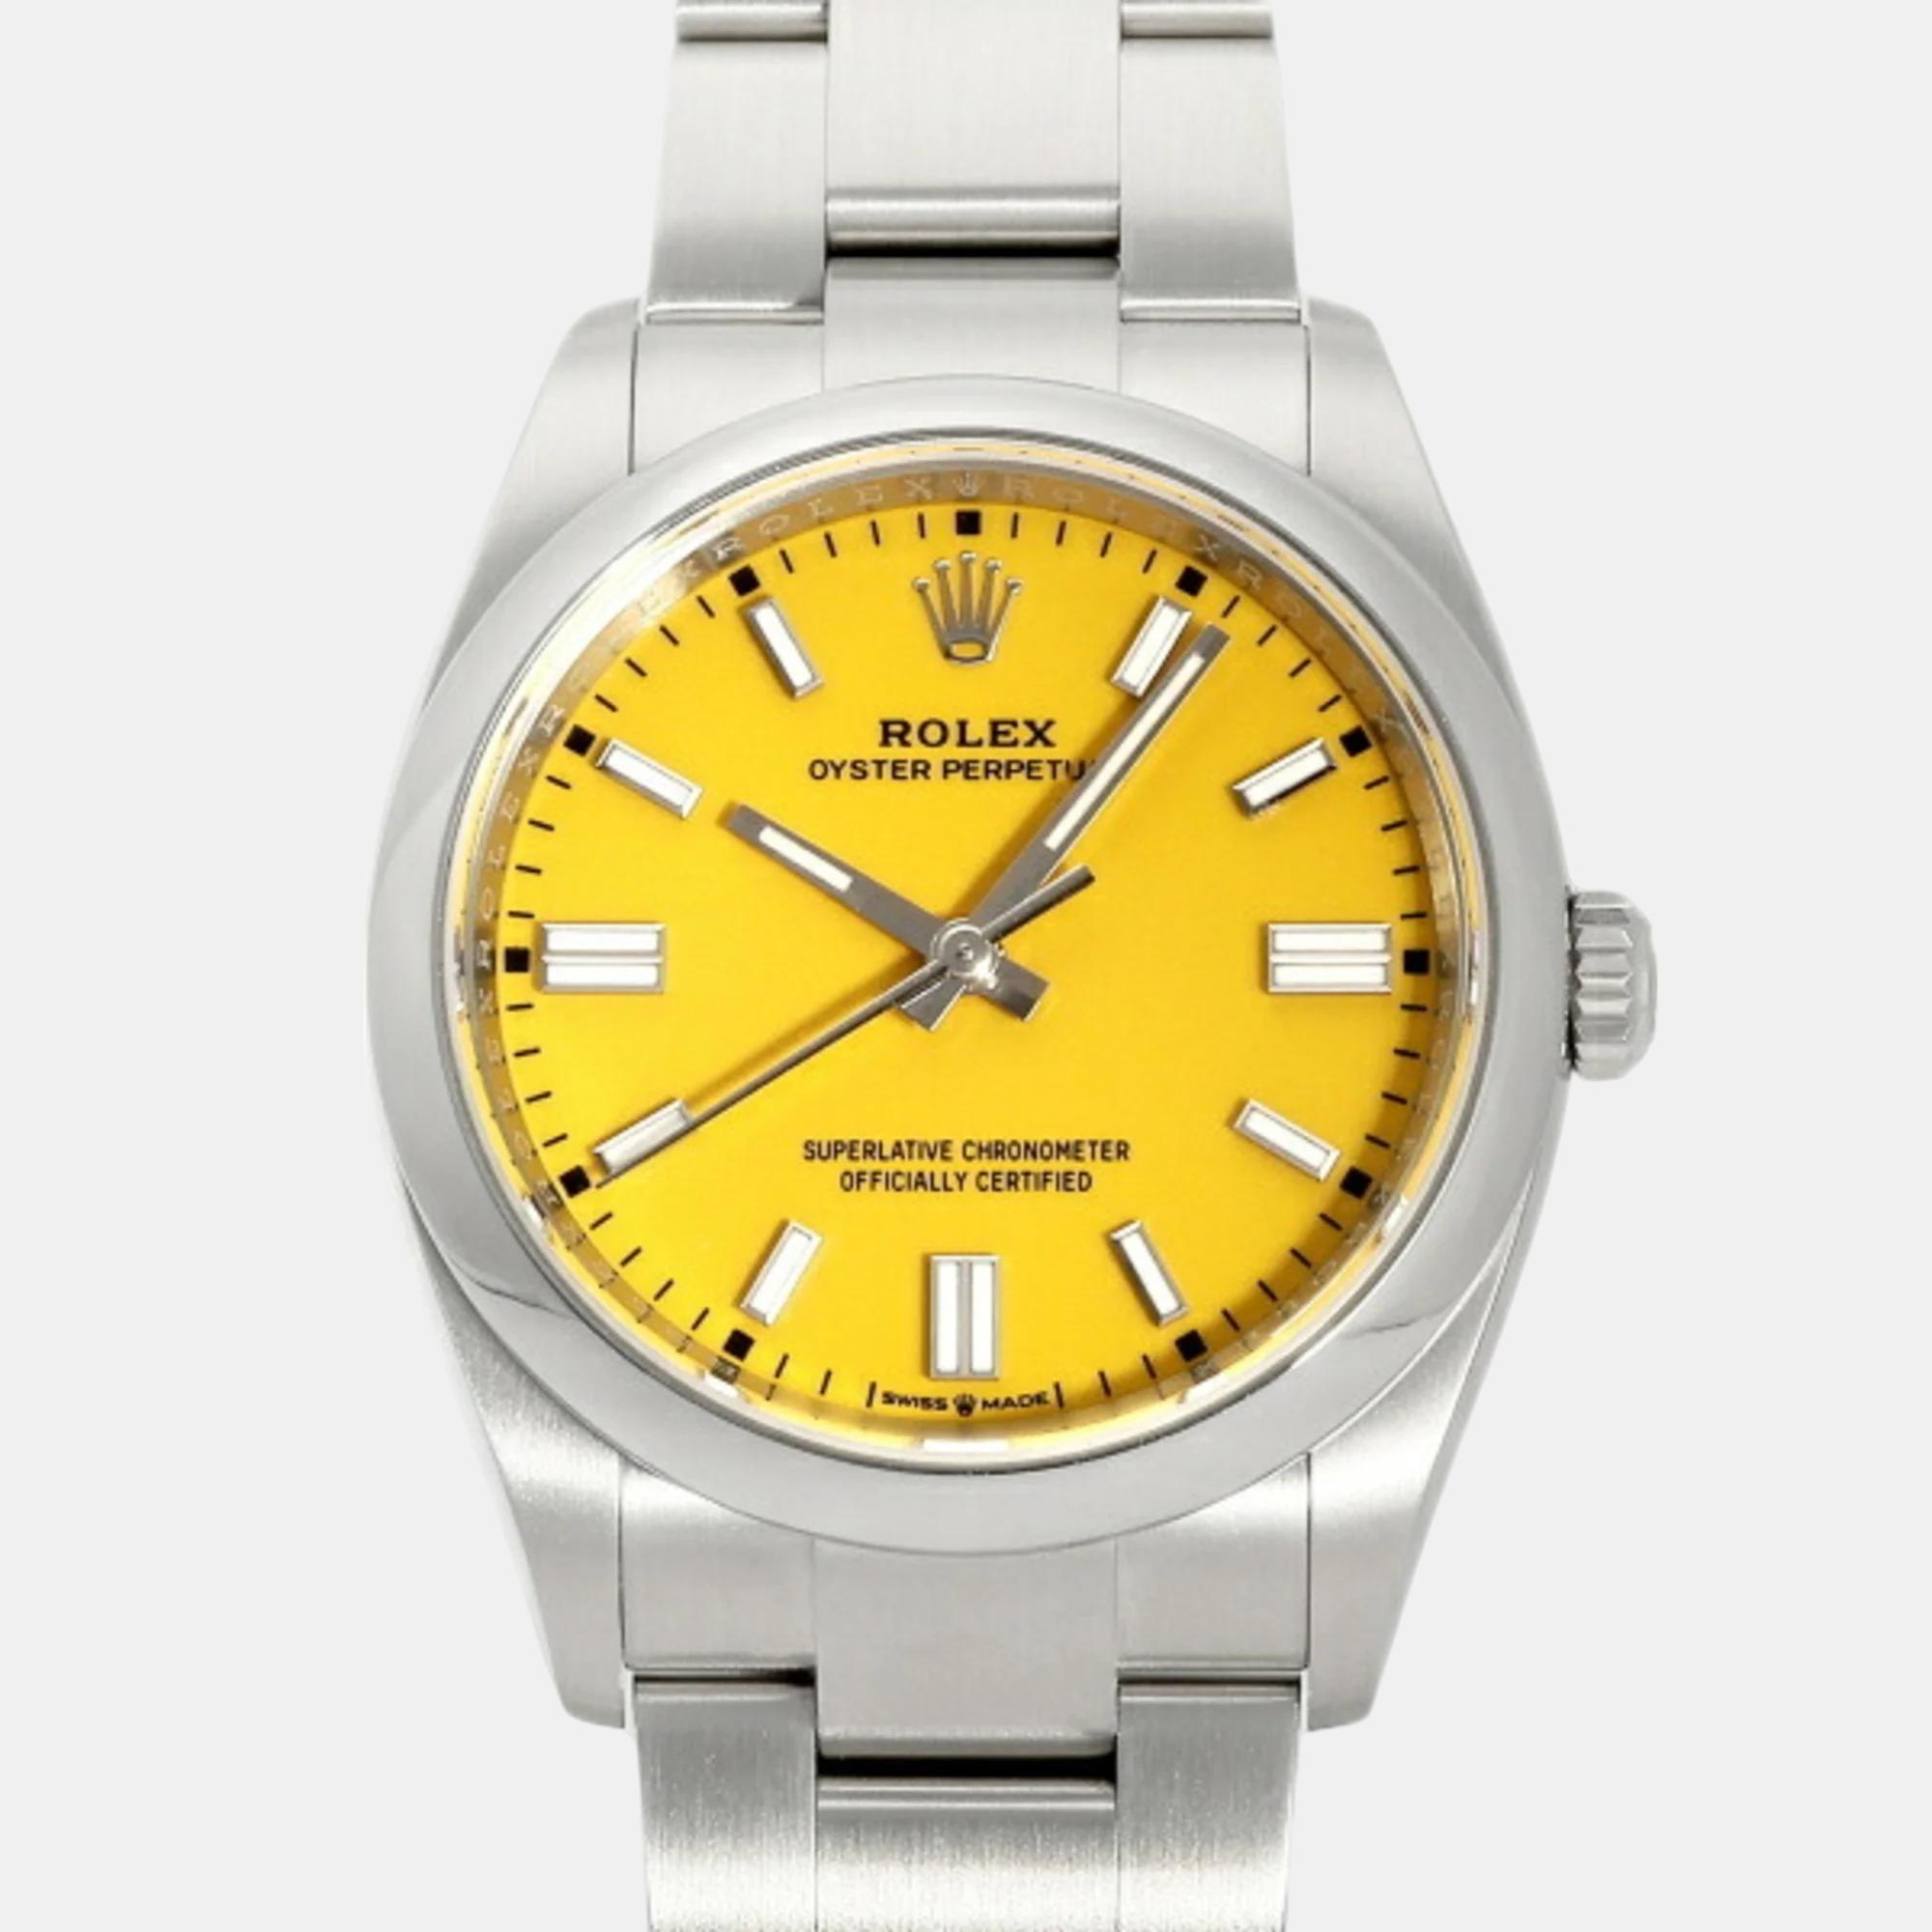 Rolex yellow stainless steel oyster perpetual 126000 men's watch 36mm